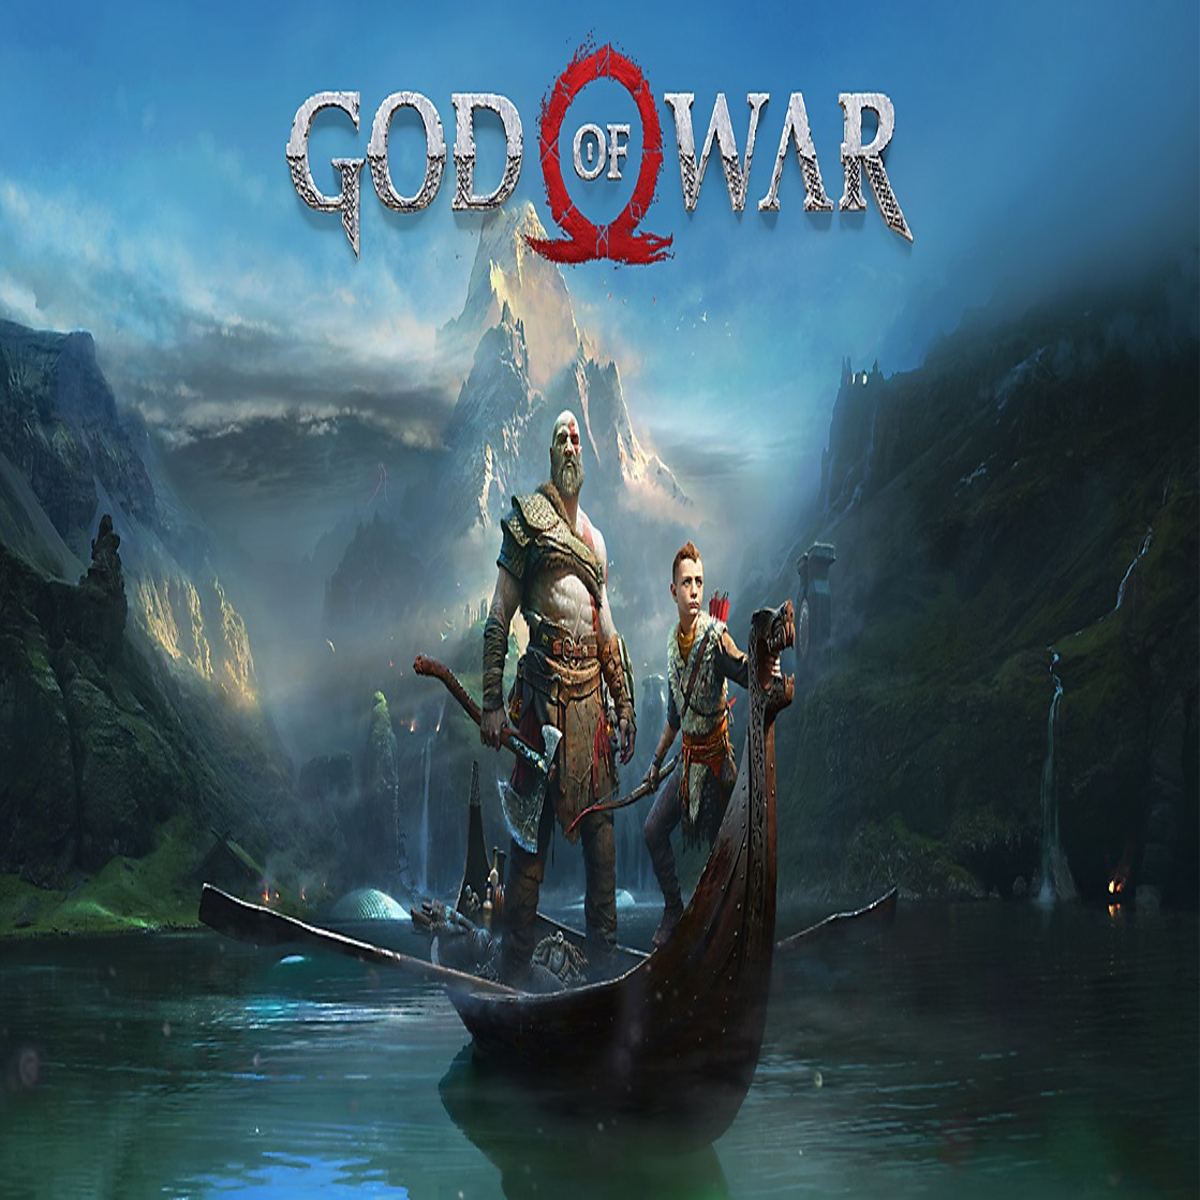 God of War (2018) - The Blades of Chaos are wrapped in his old